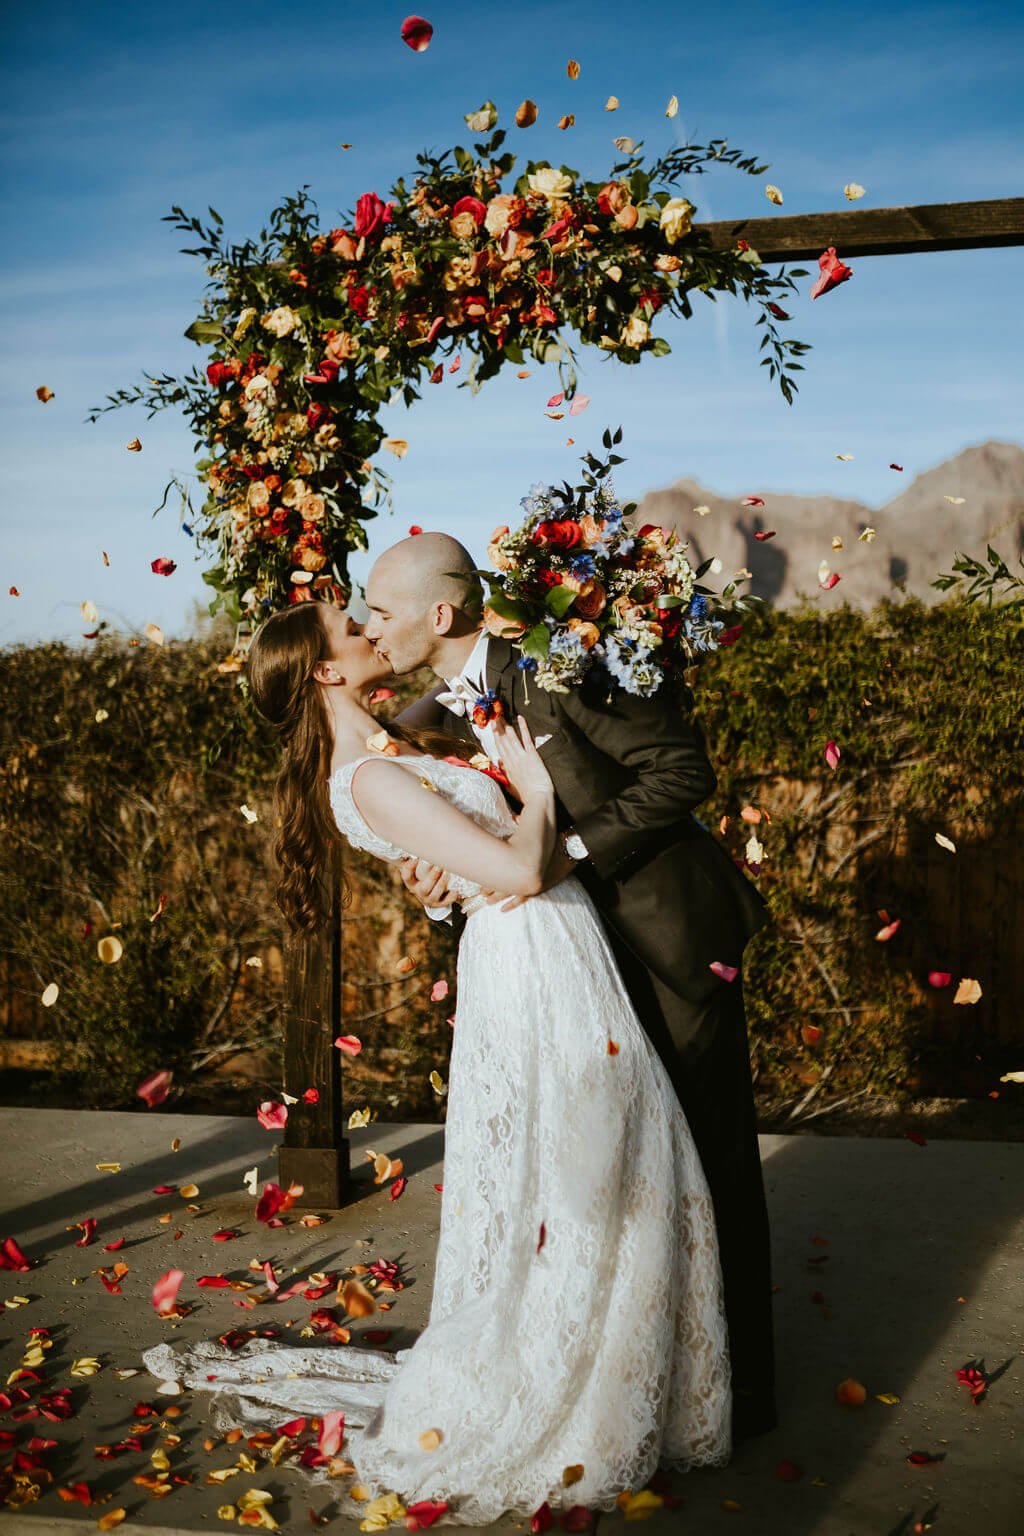 Bride and groom kissing under arbor with flower petals in the air and mountains in the background at Arizona desert wedding